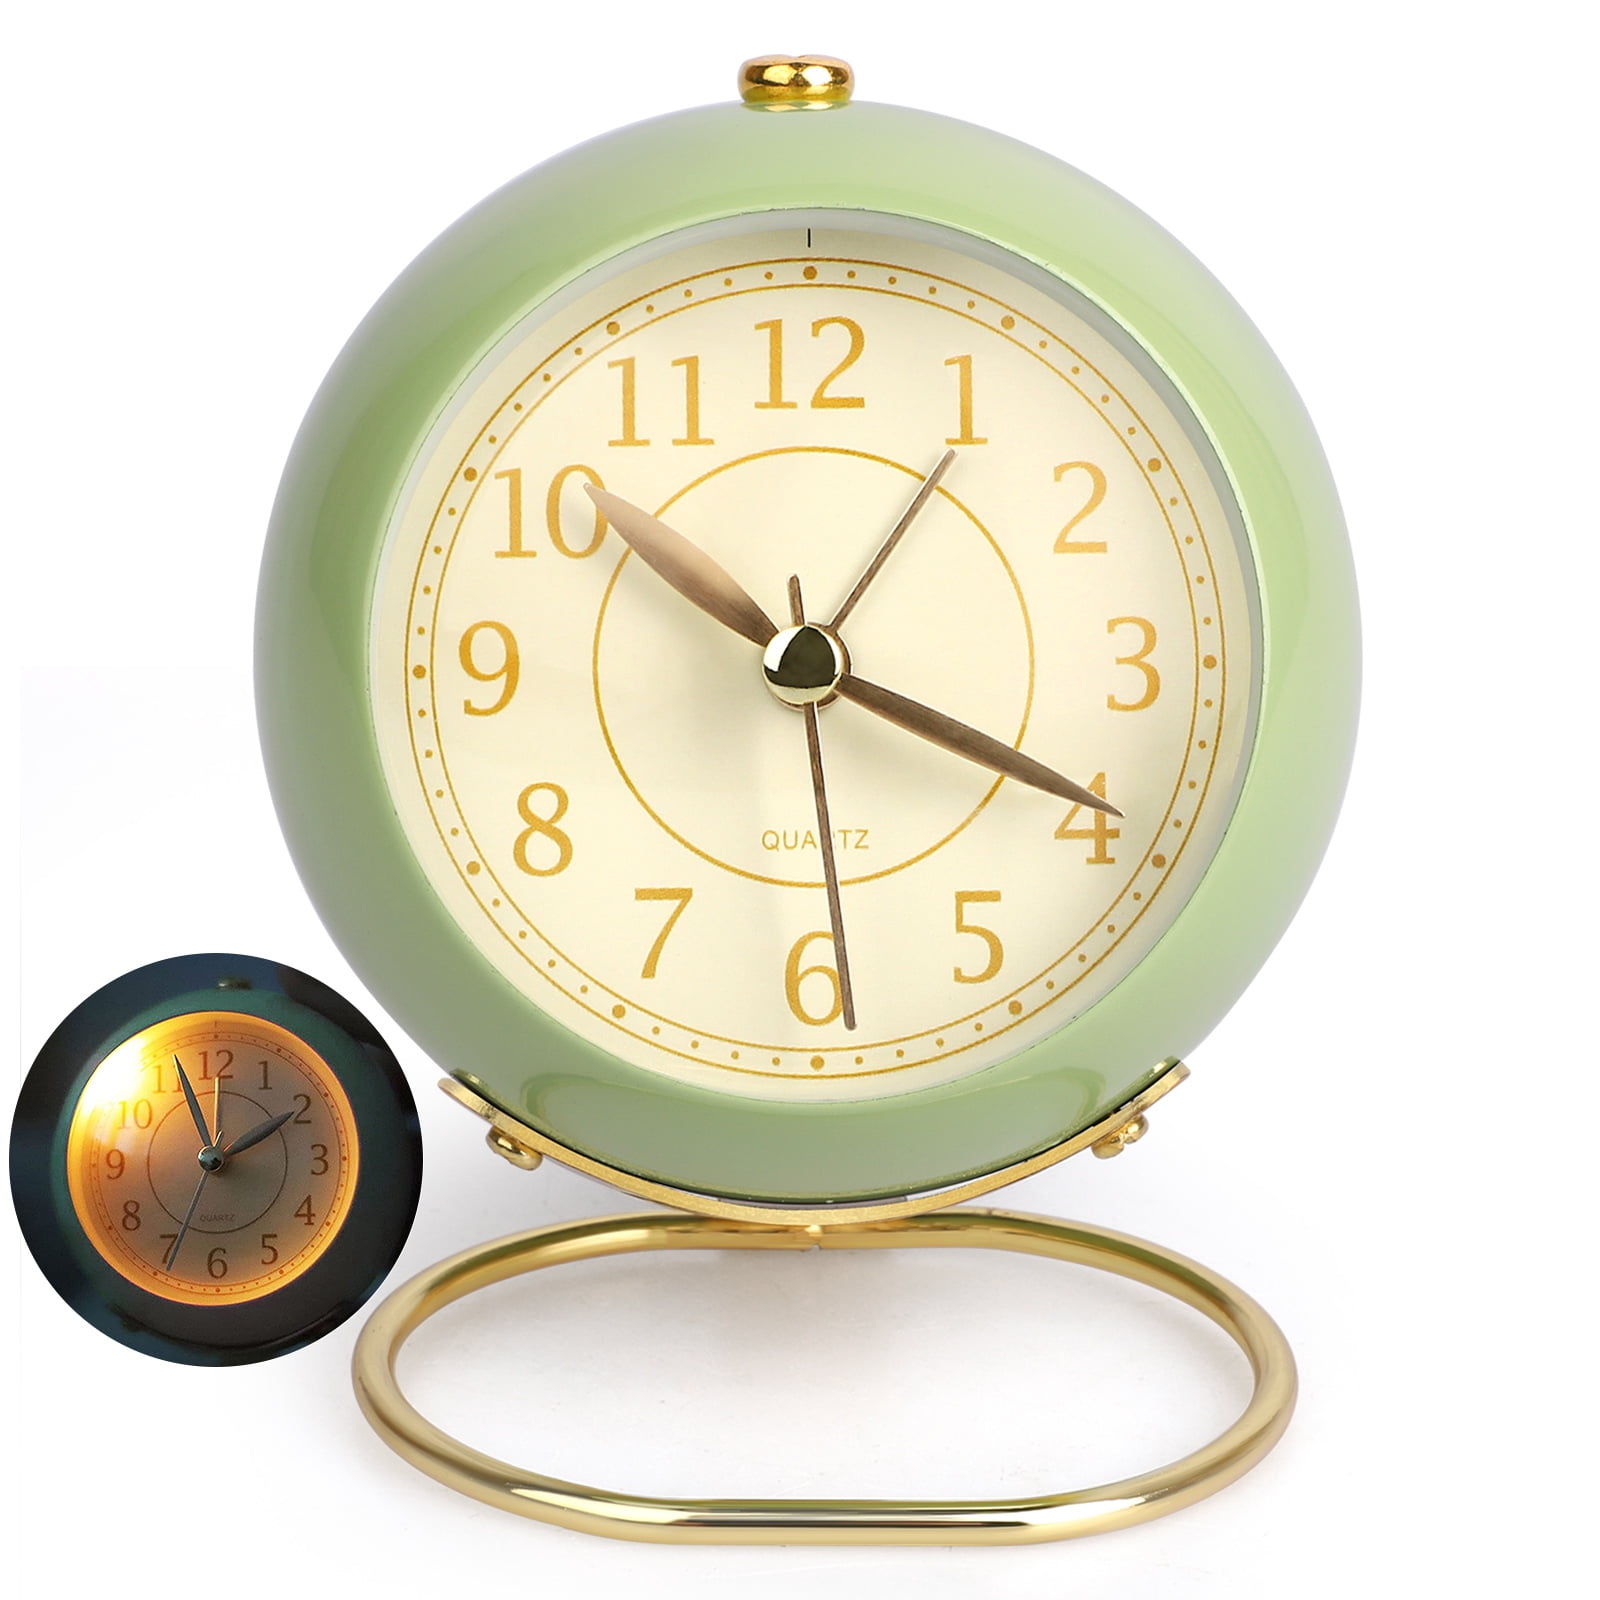 Small Round Bedside Table Retro Alarm Clock Office Home Desk Matte Analogue Dial 